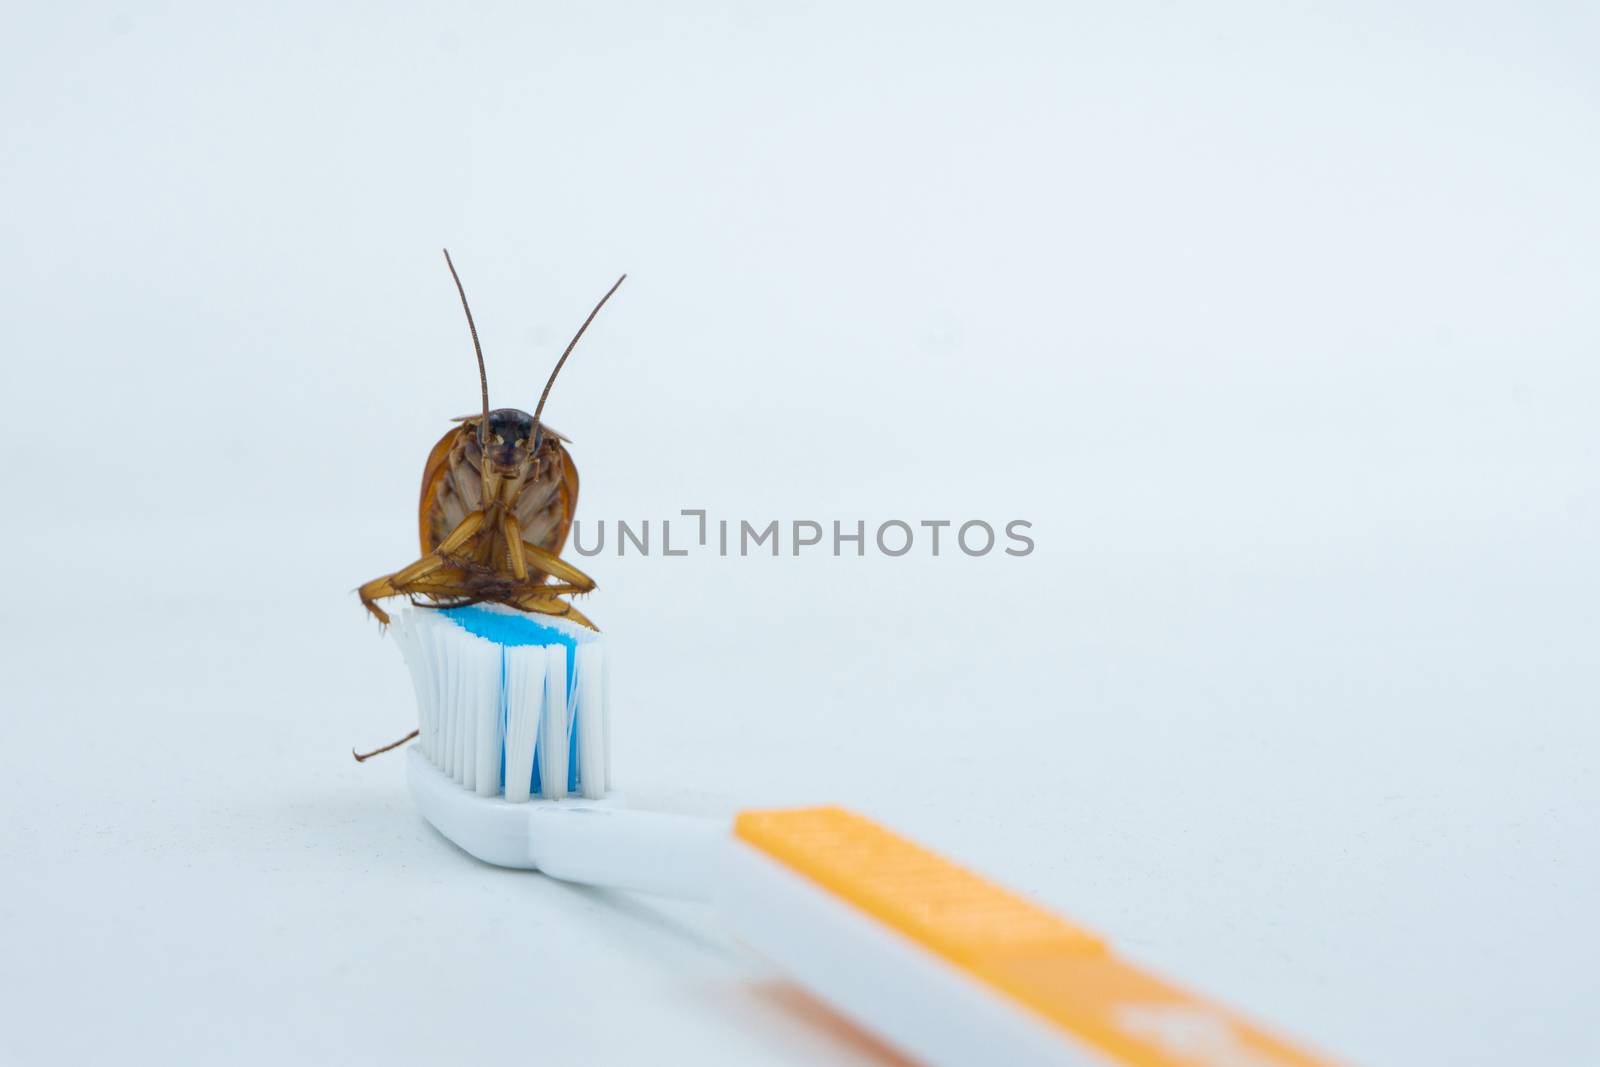 Asian Cockroaches are on the toothbrush. by pkproject